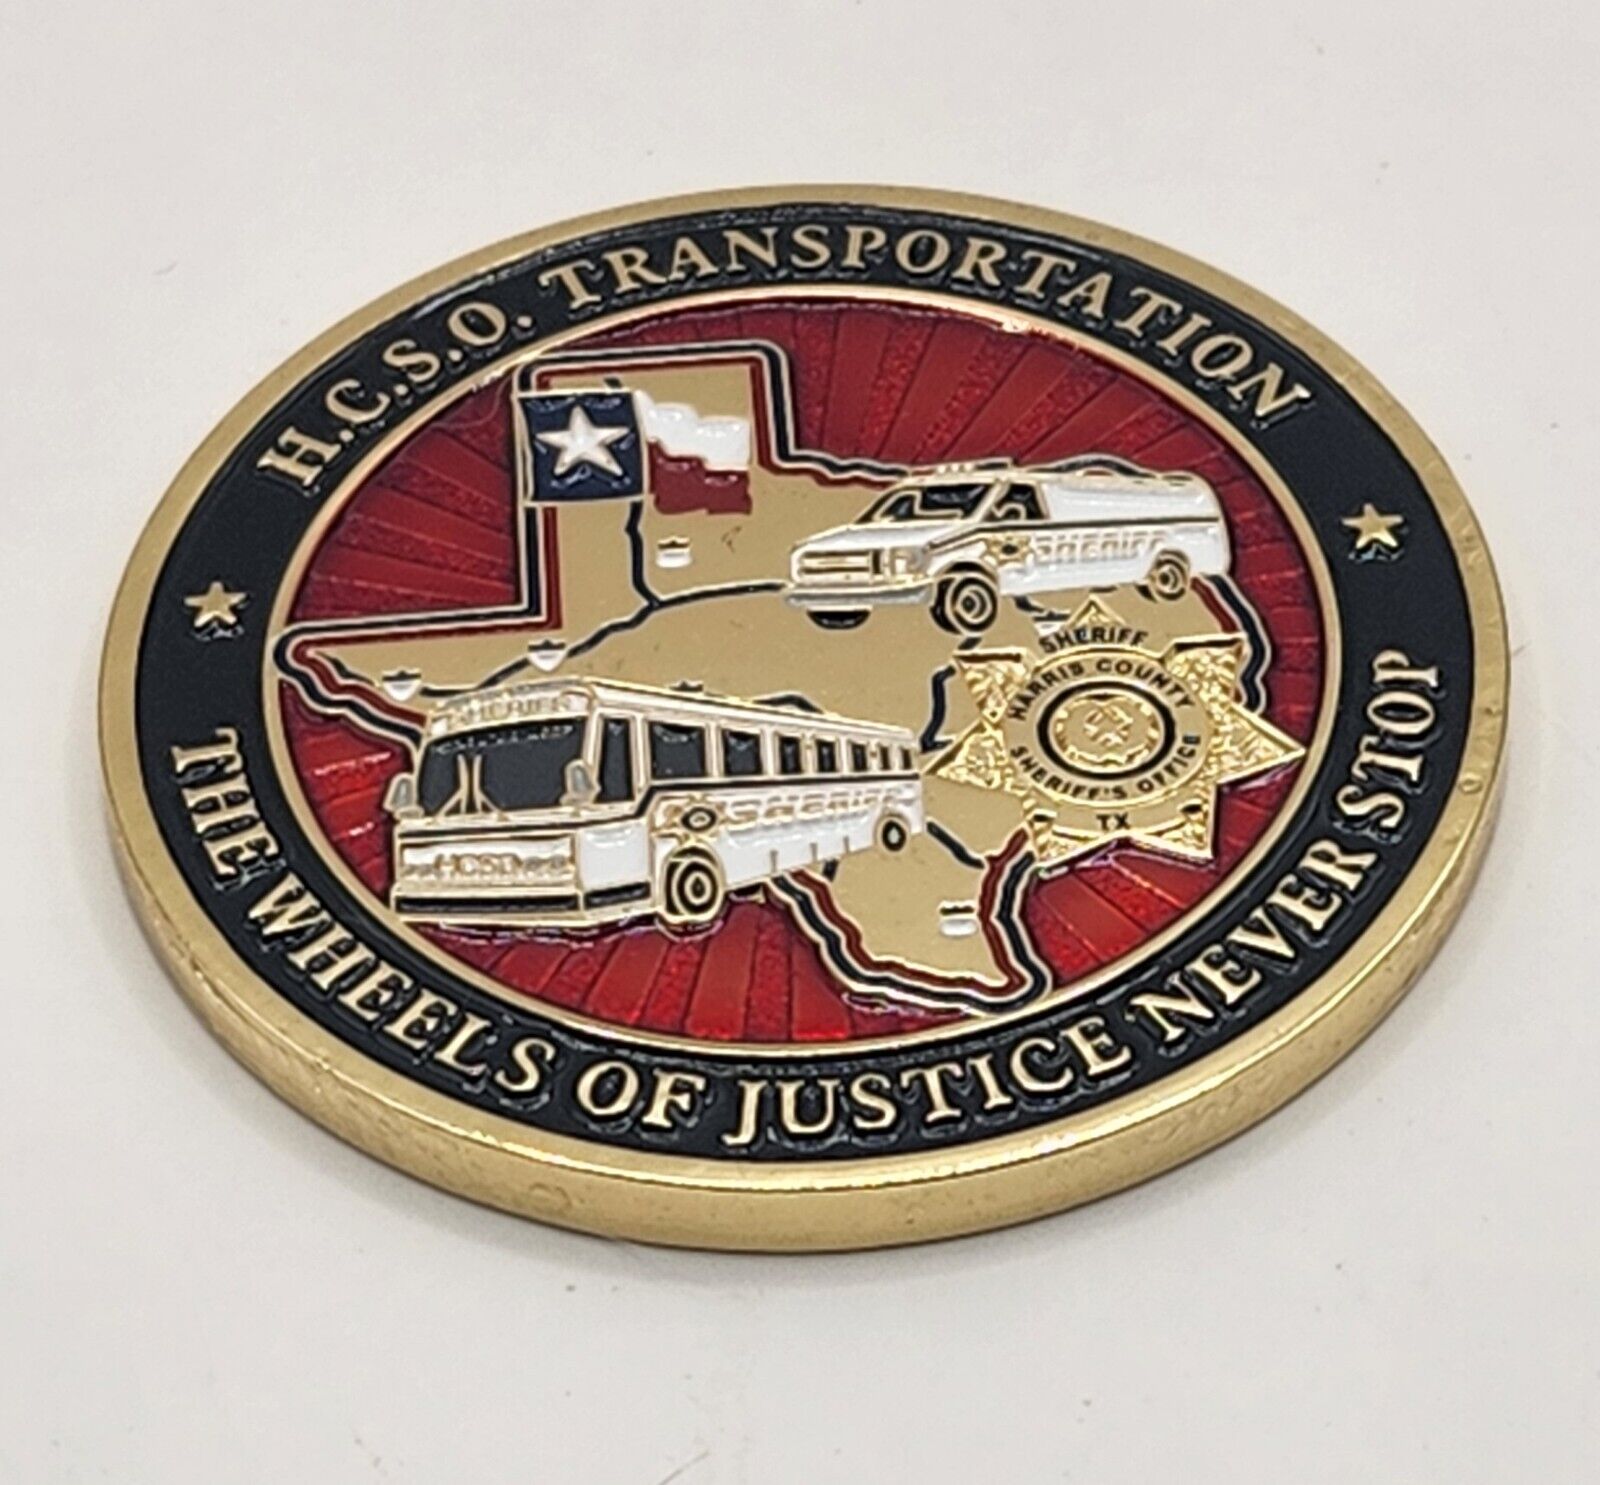 Harris County Sheriff’s Office Transportation/Hospital Security Challenge Coin